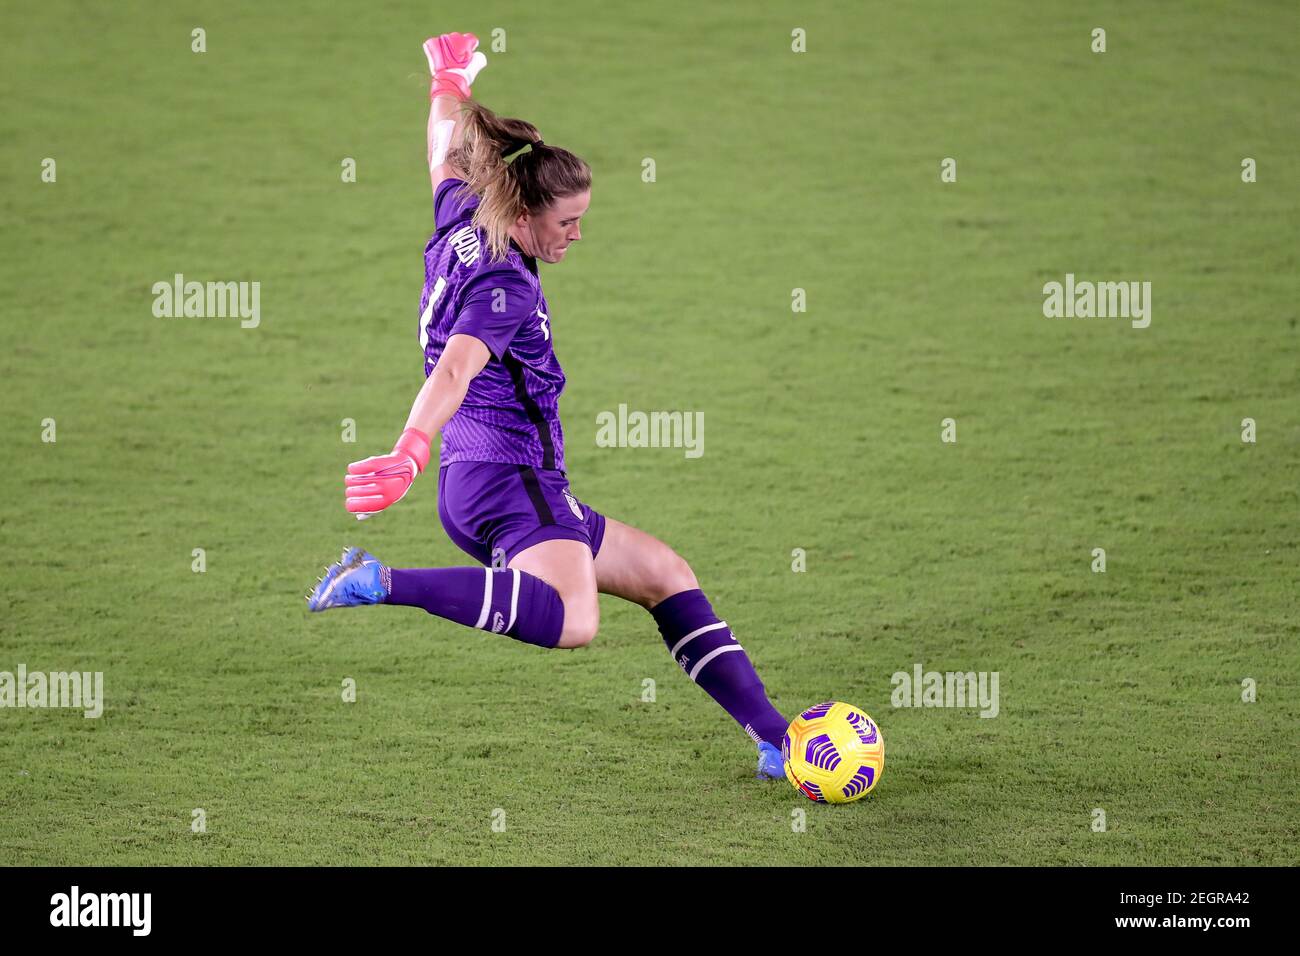 February 18, 2021: United States goalkeeper ALYSSA NAEHER (1) makes a kick during the SheBelieves Cup United States vs Canada match at Exploria Stadium in Orlando, Fl on February 18, 2021. Credit: Cory Knowlton/ZUMA Wire/Alamy Live News Stock Photo